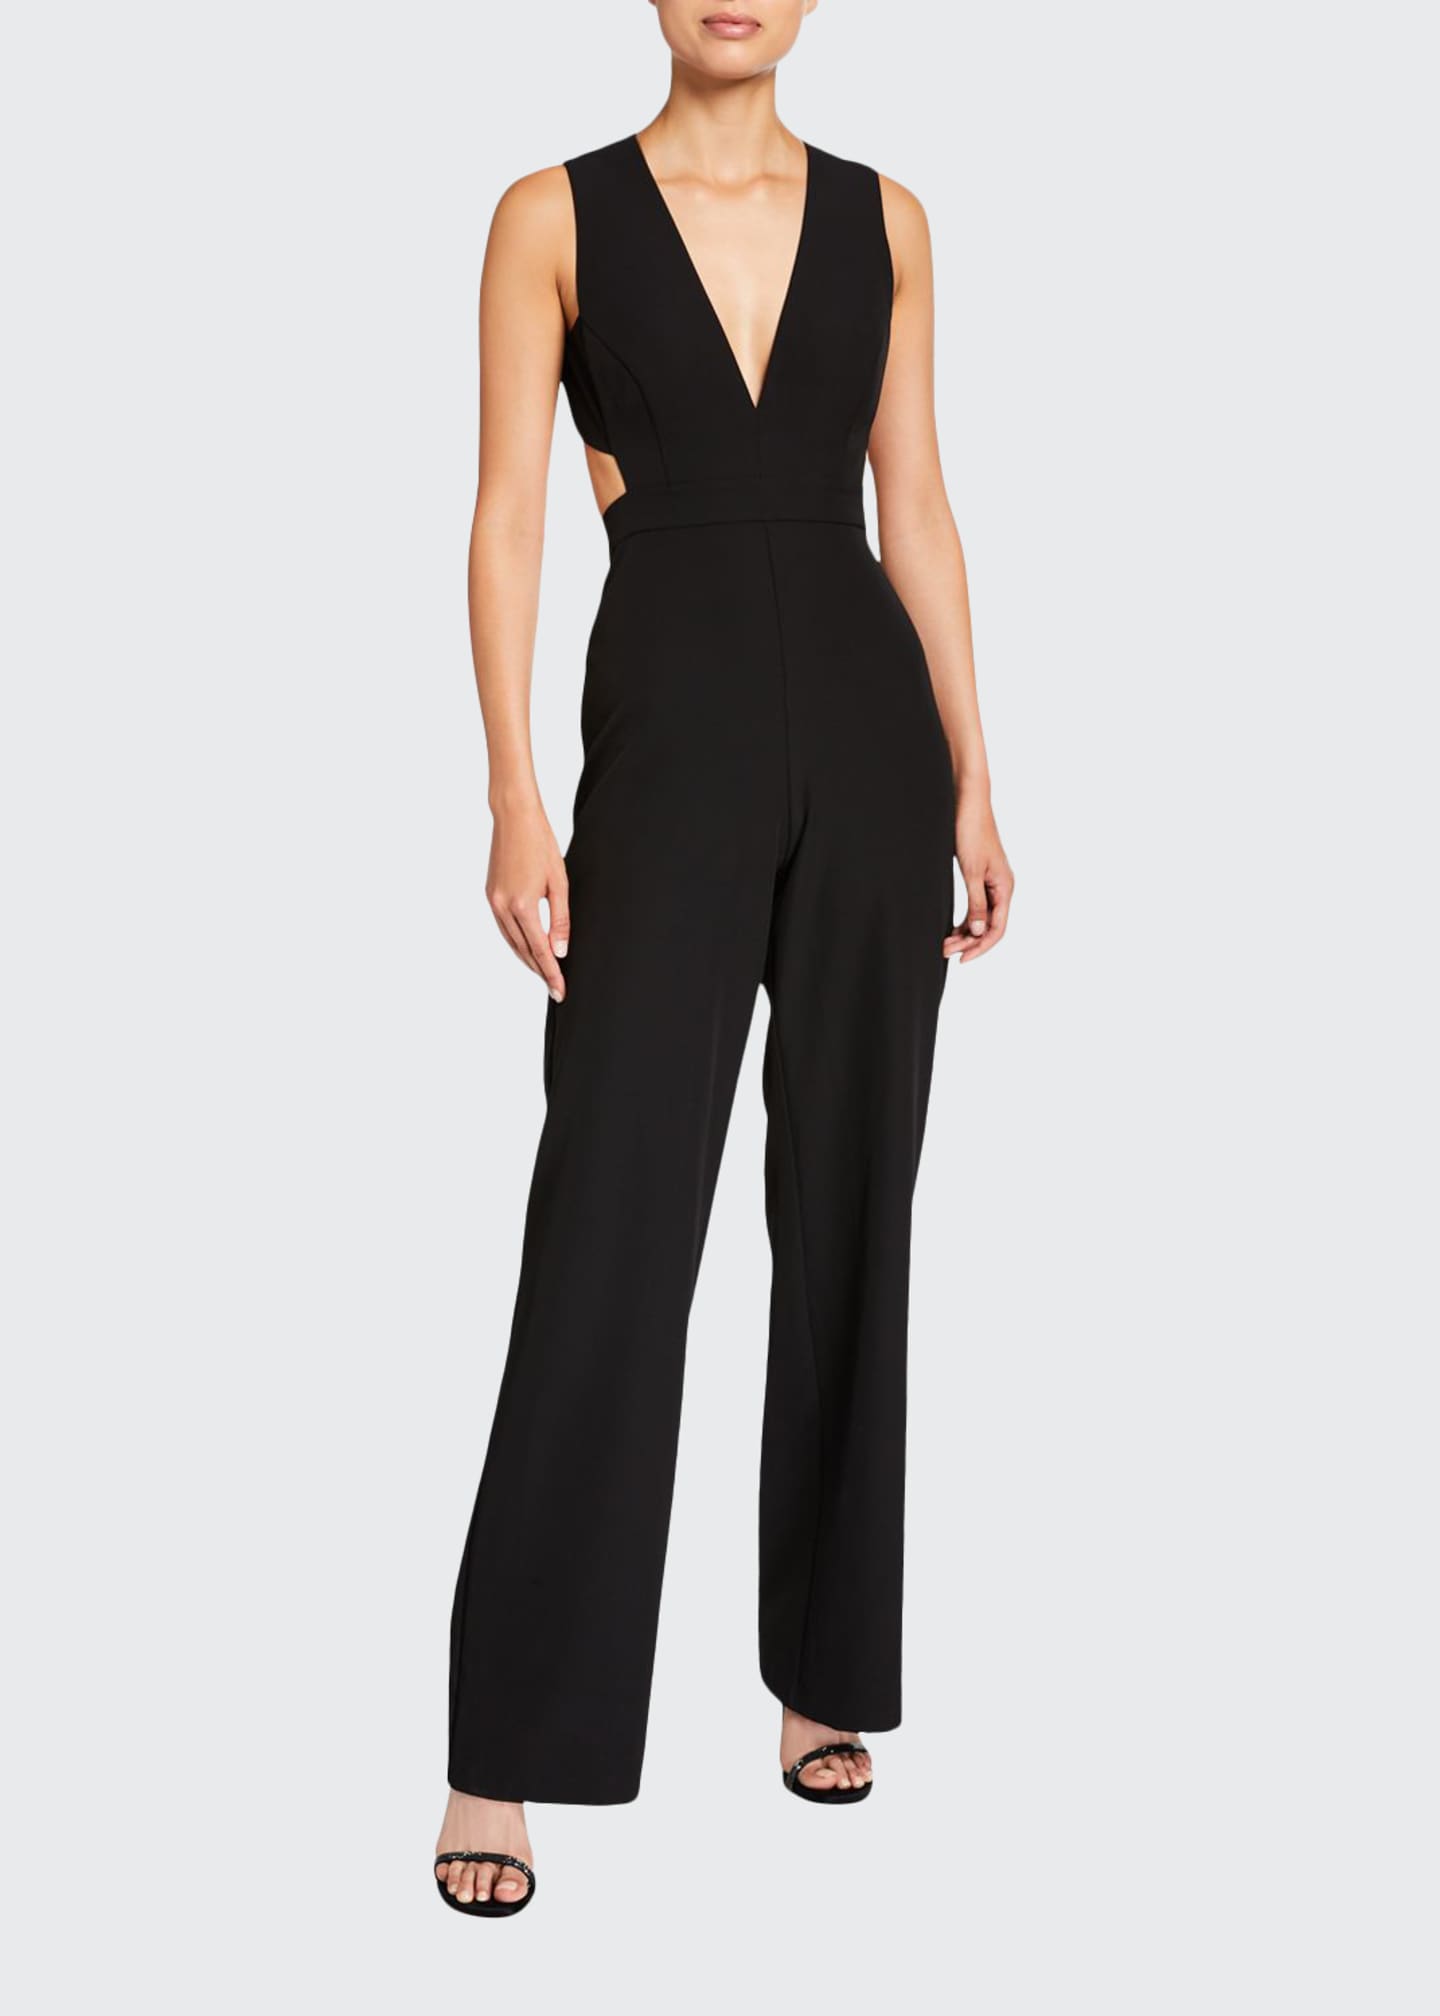 Aidan by Aidan Mattox Plunge-Neck Sleeveless Crepe Jumpsuit with ...